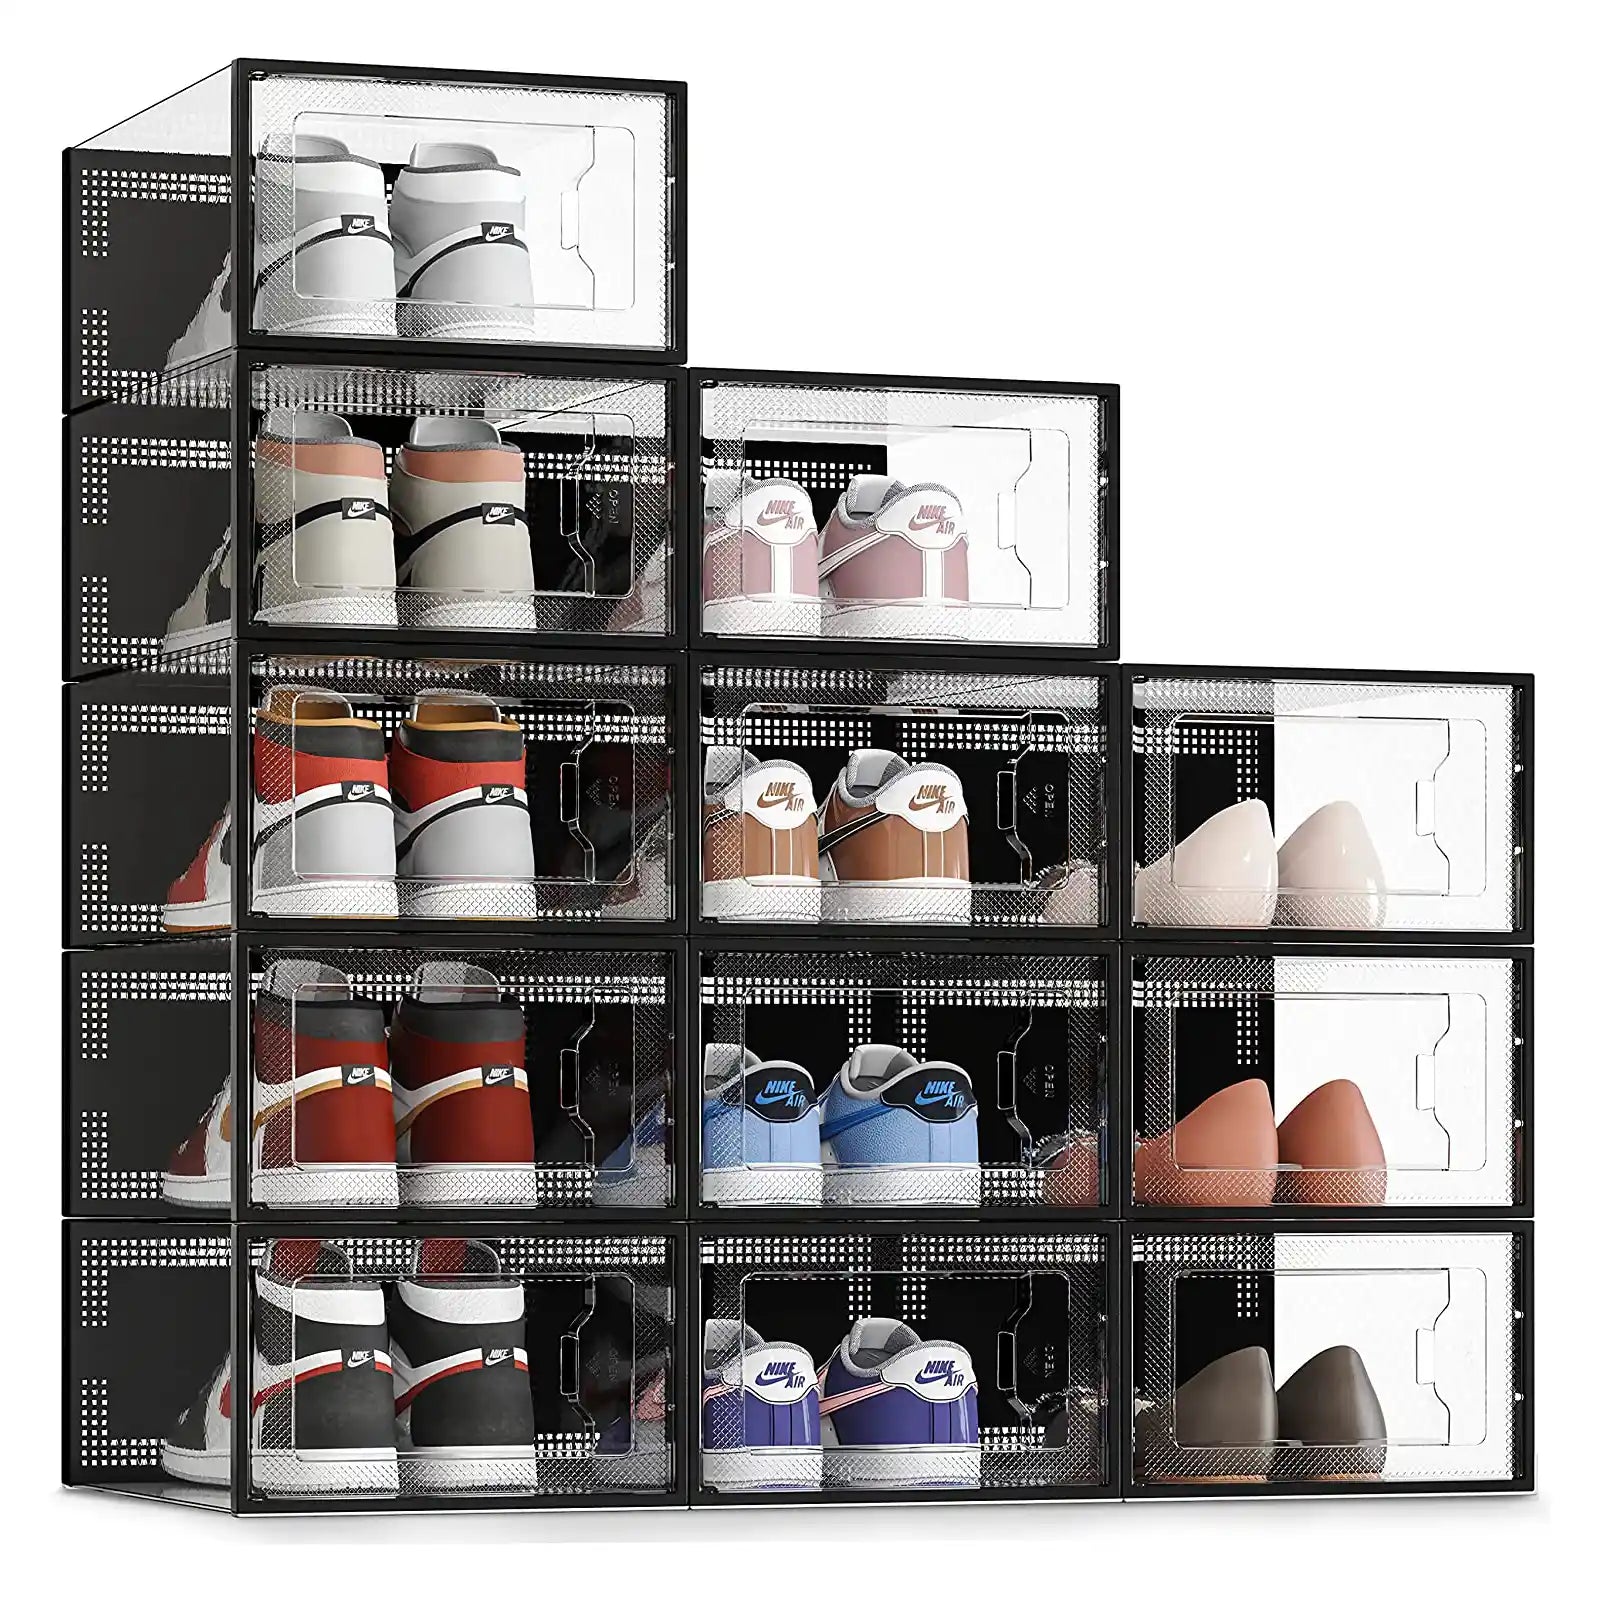 Large 12 Pack Shoe Storage Box, Clear Plastic Stackable Shoe Organizer for Closet, Shoe Rack Sneaker Containers Bins Holders Fit up to Size 14